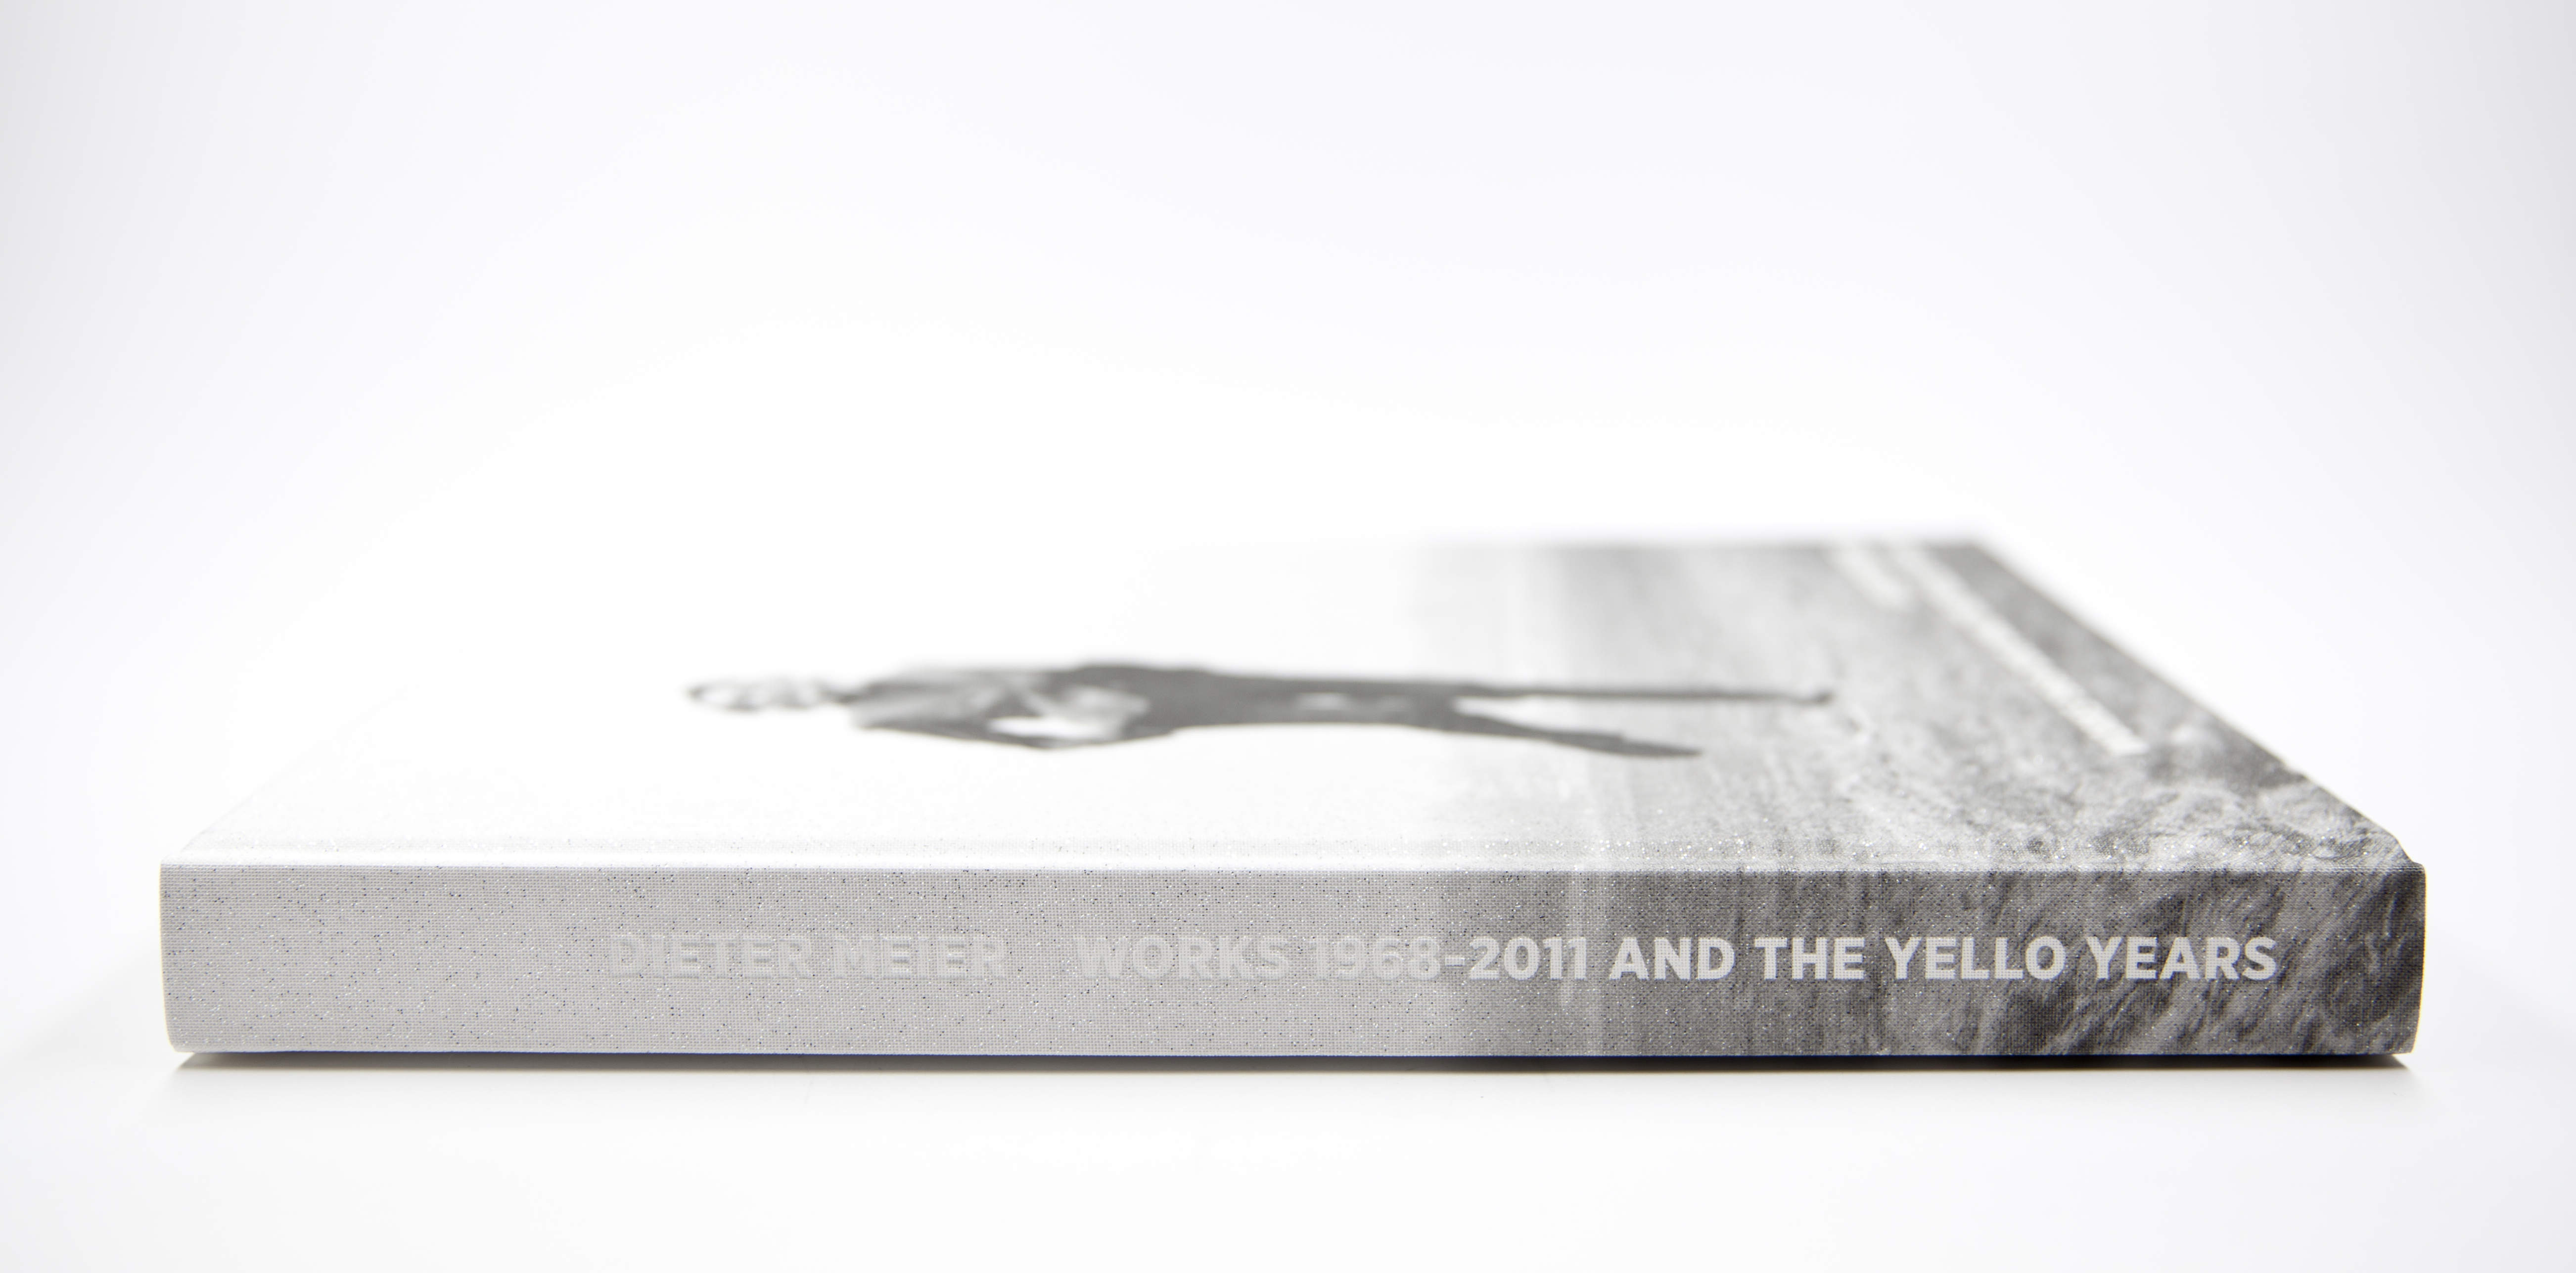 Dieter Meier: Works 1968–2011 and the Yello Years